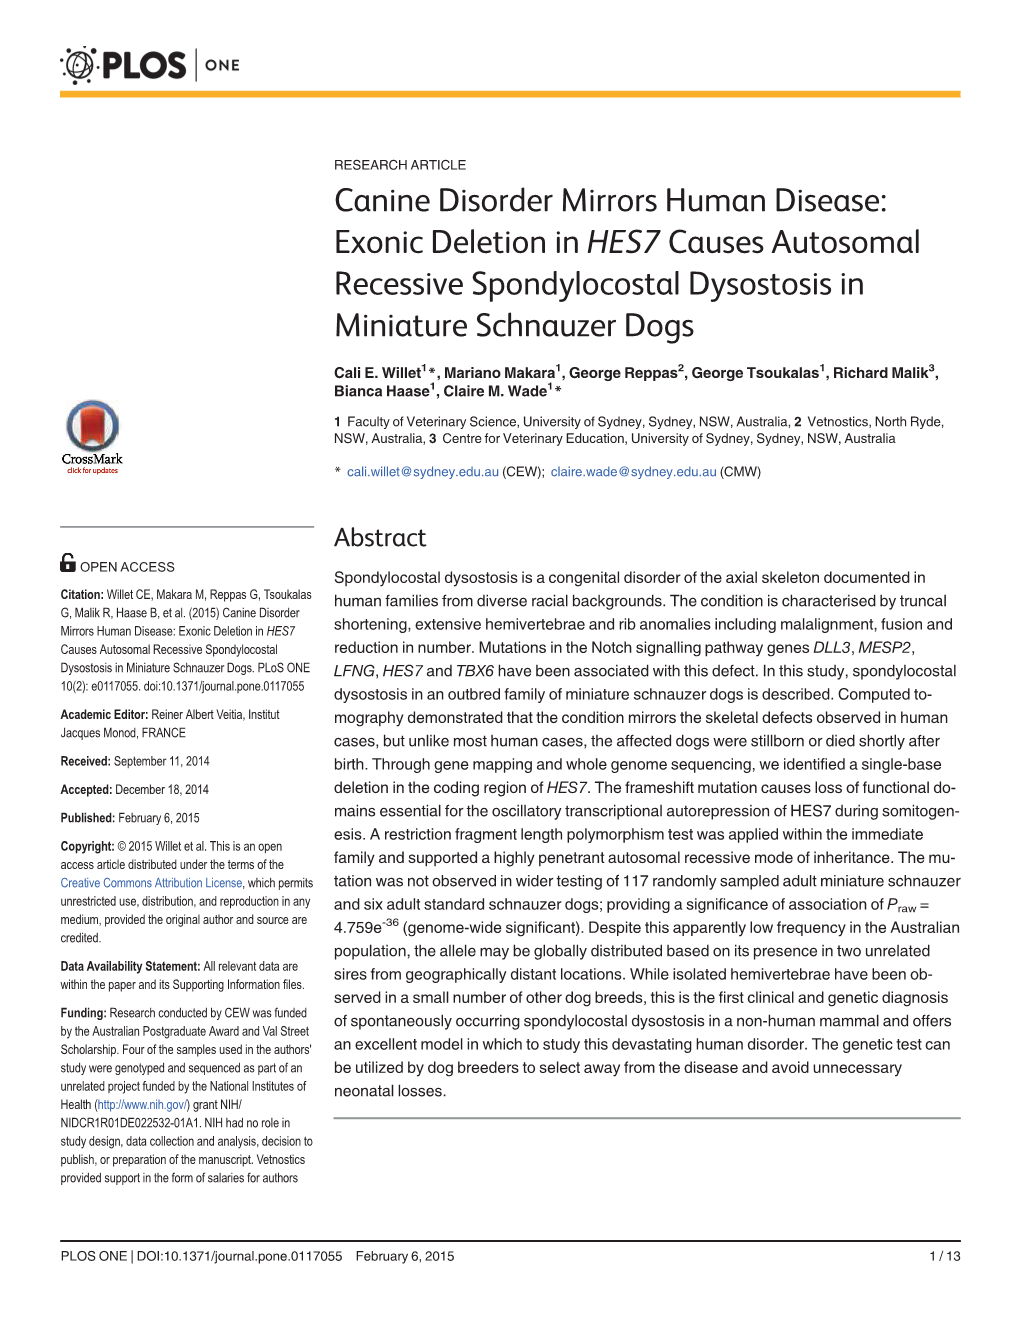 Exonic Deletion in HES7 Causes Autosomal Recessive Spondylocostal Dysostosis in Miniature Schnauzer Dogs